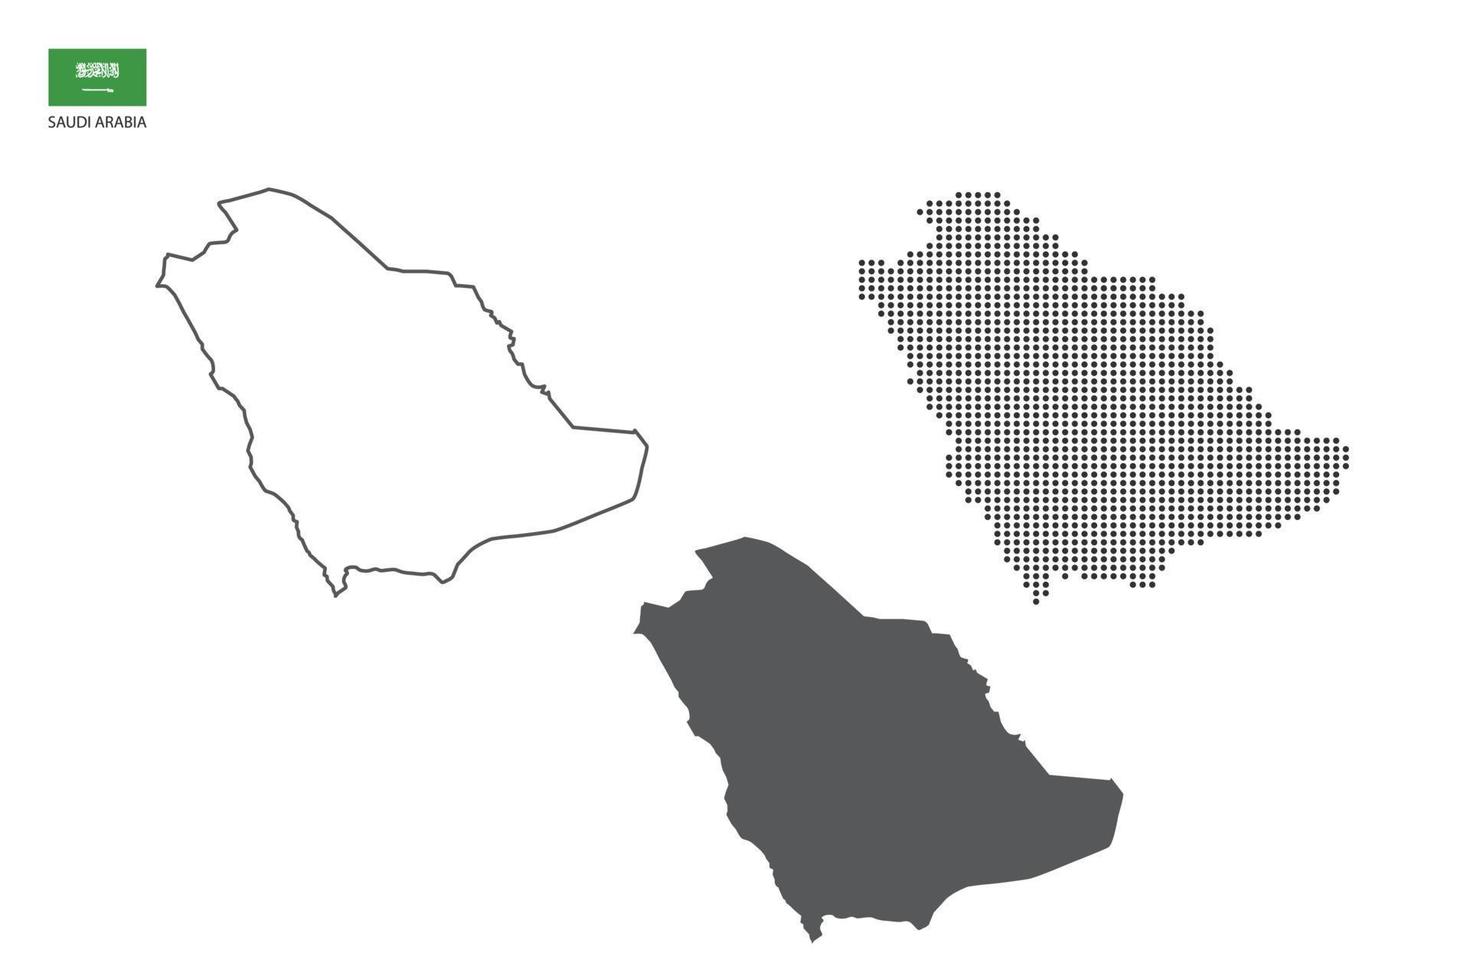 3 versions of Saudi Arabia map city vector by thin black outline simplicity style, Black dot style and Dark shadow style. All in the white background.